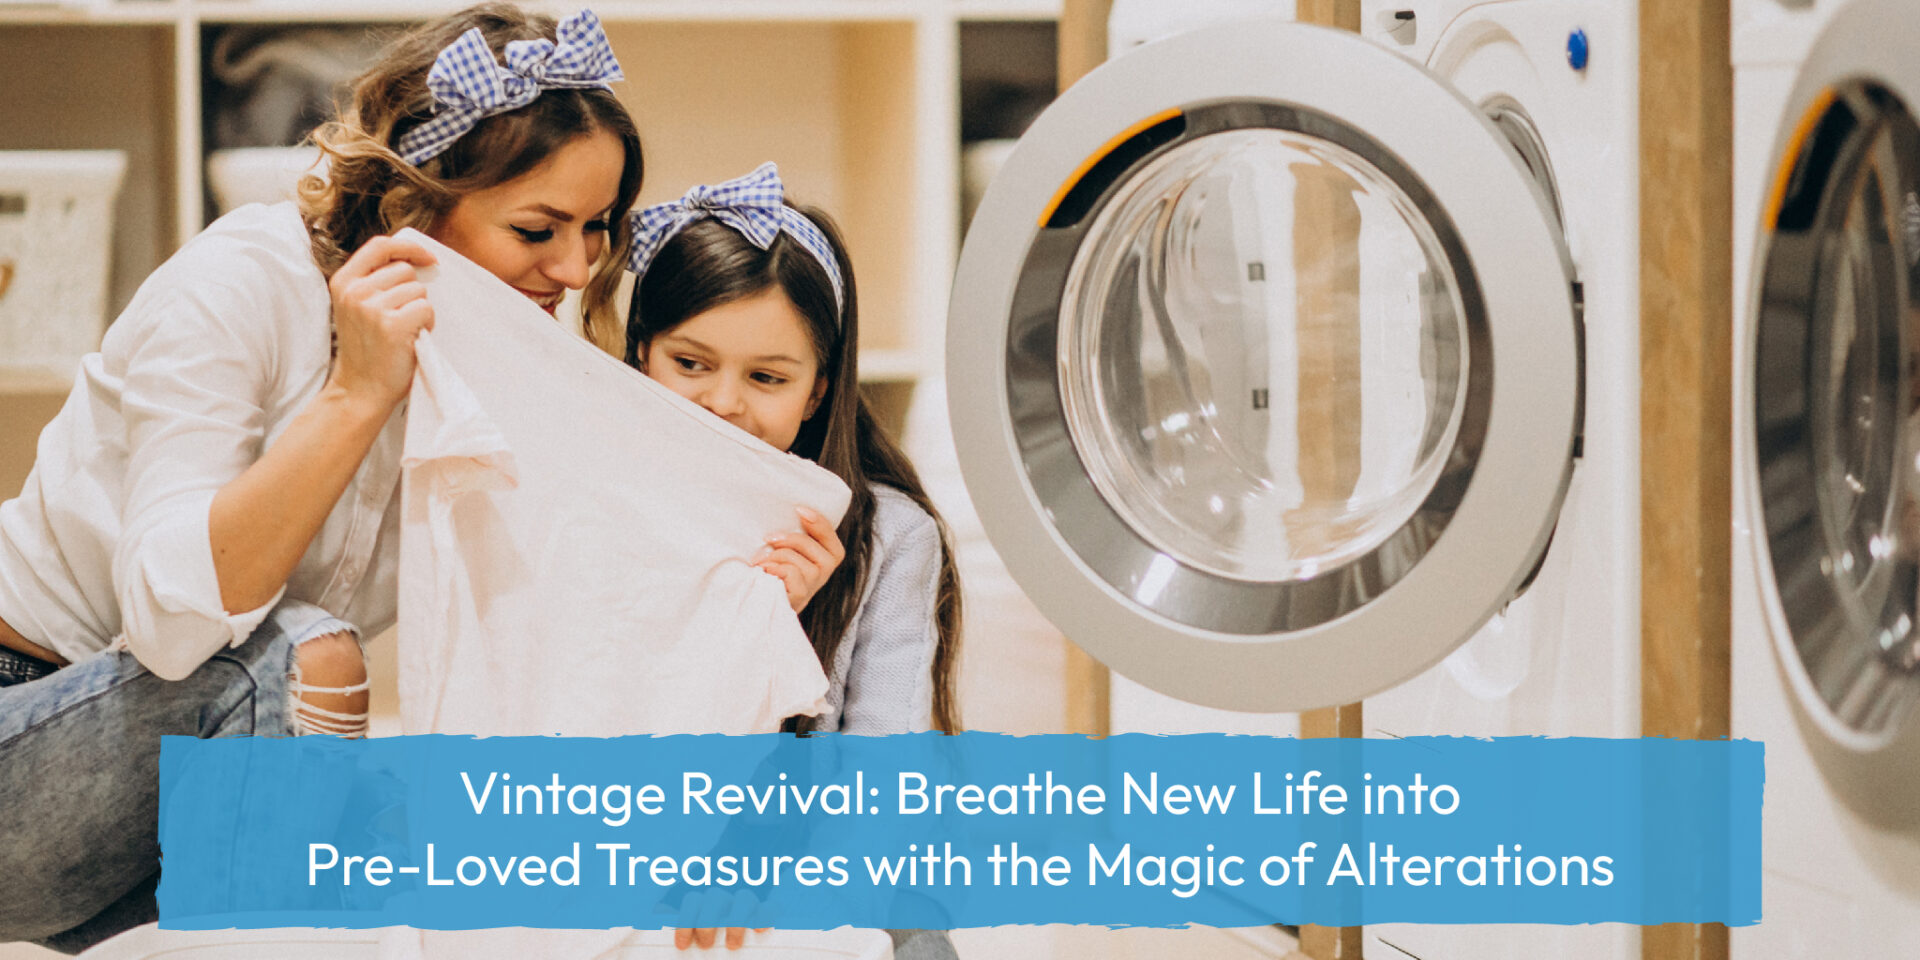 Vintage Revival: Breathe New Life into Pre-Loved Treasures with the Magic of Alterations